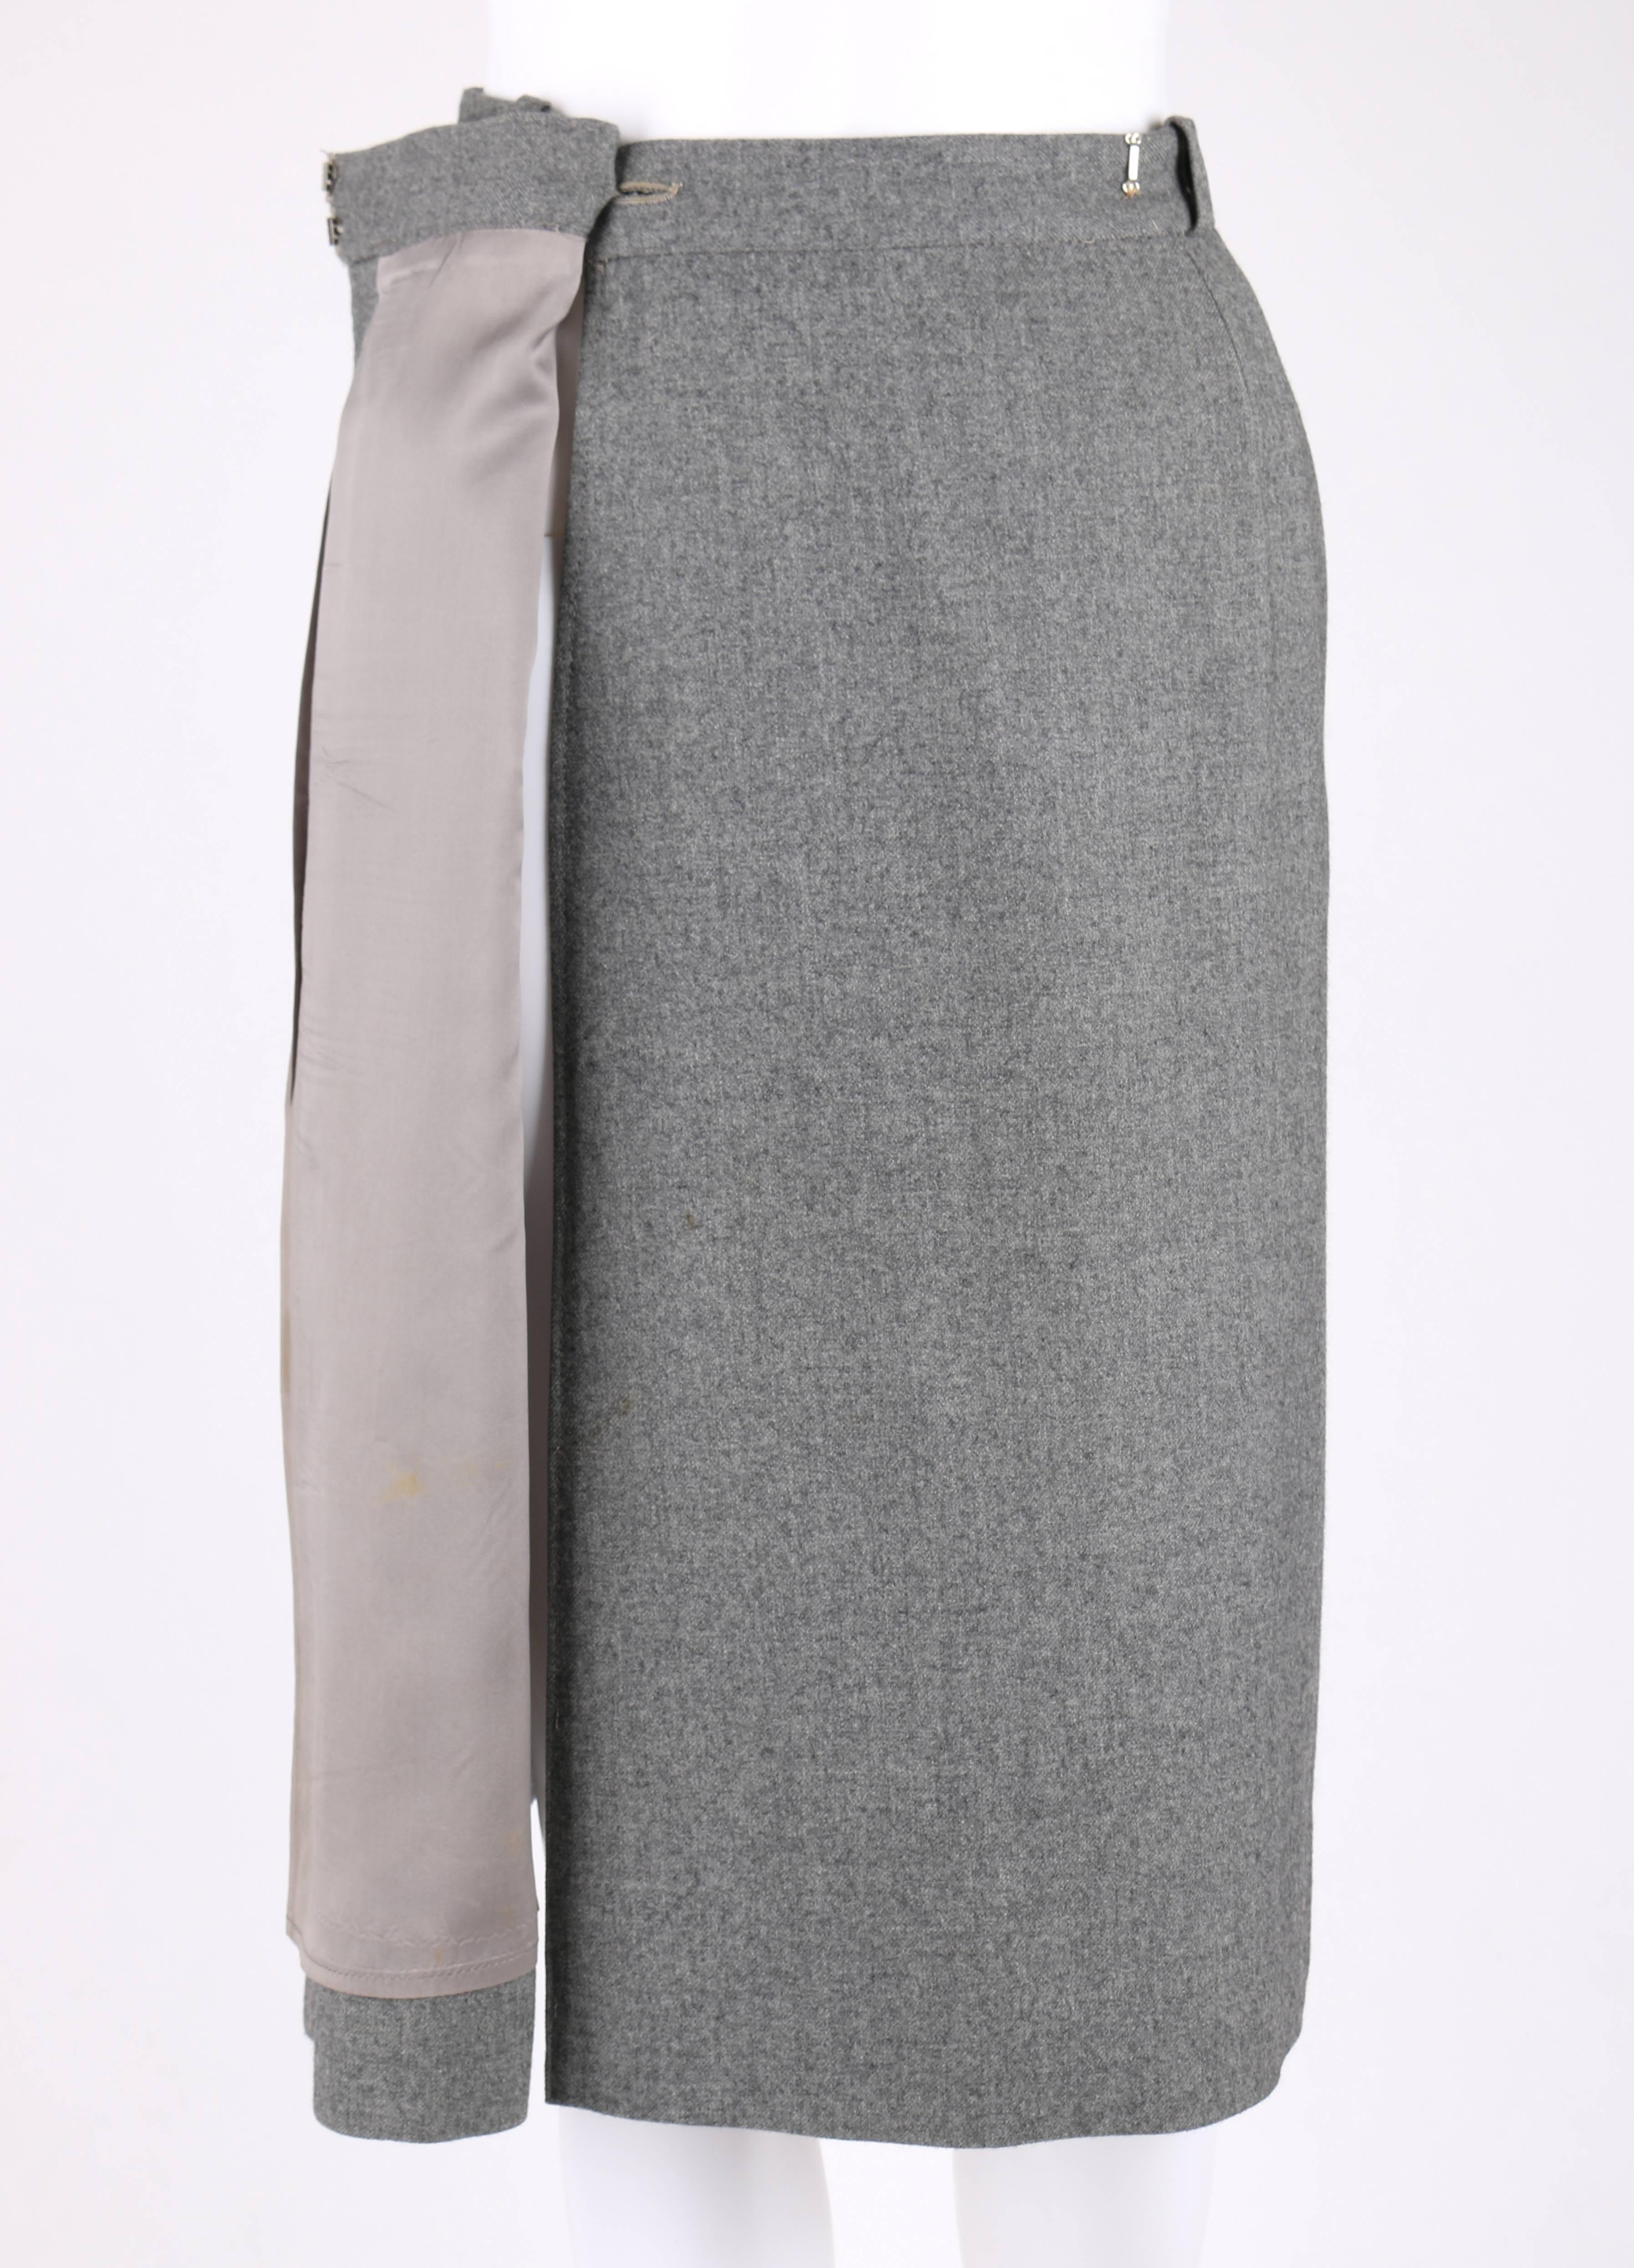 GUCCI c.1970's Gray Wool Classic Wrap Skirt Brown Leather Piping Trim For Sale 2